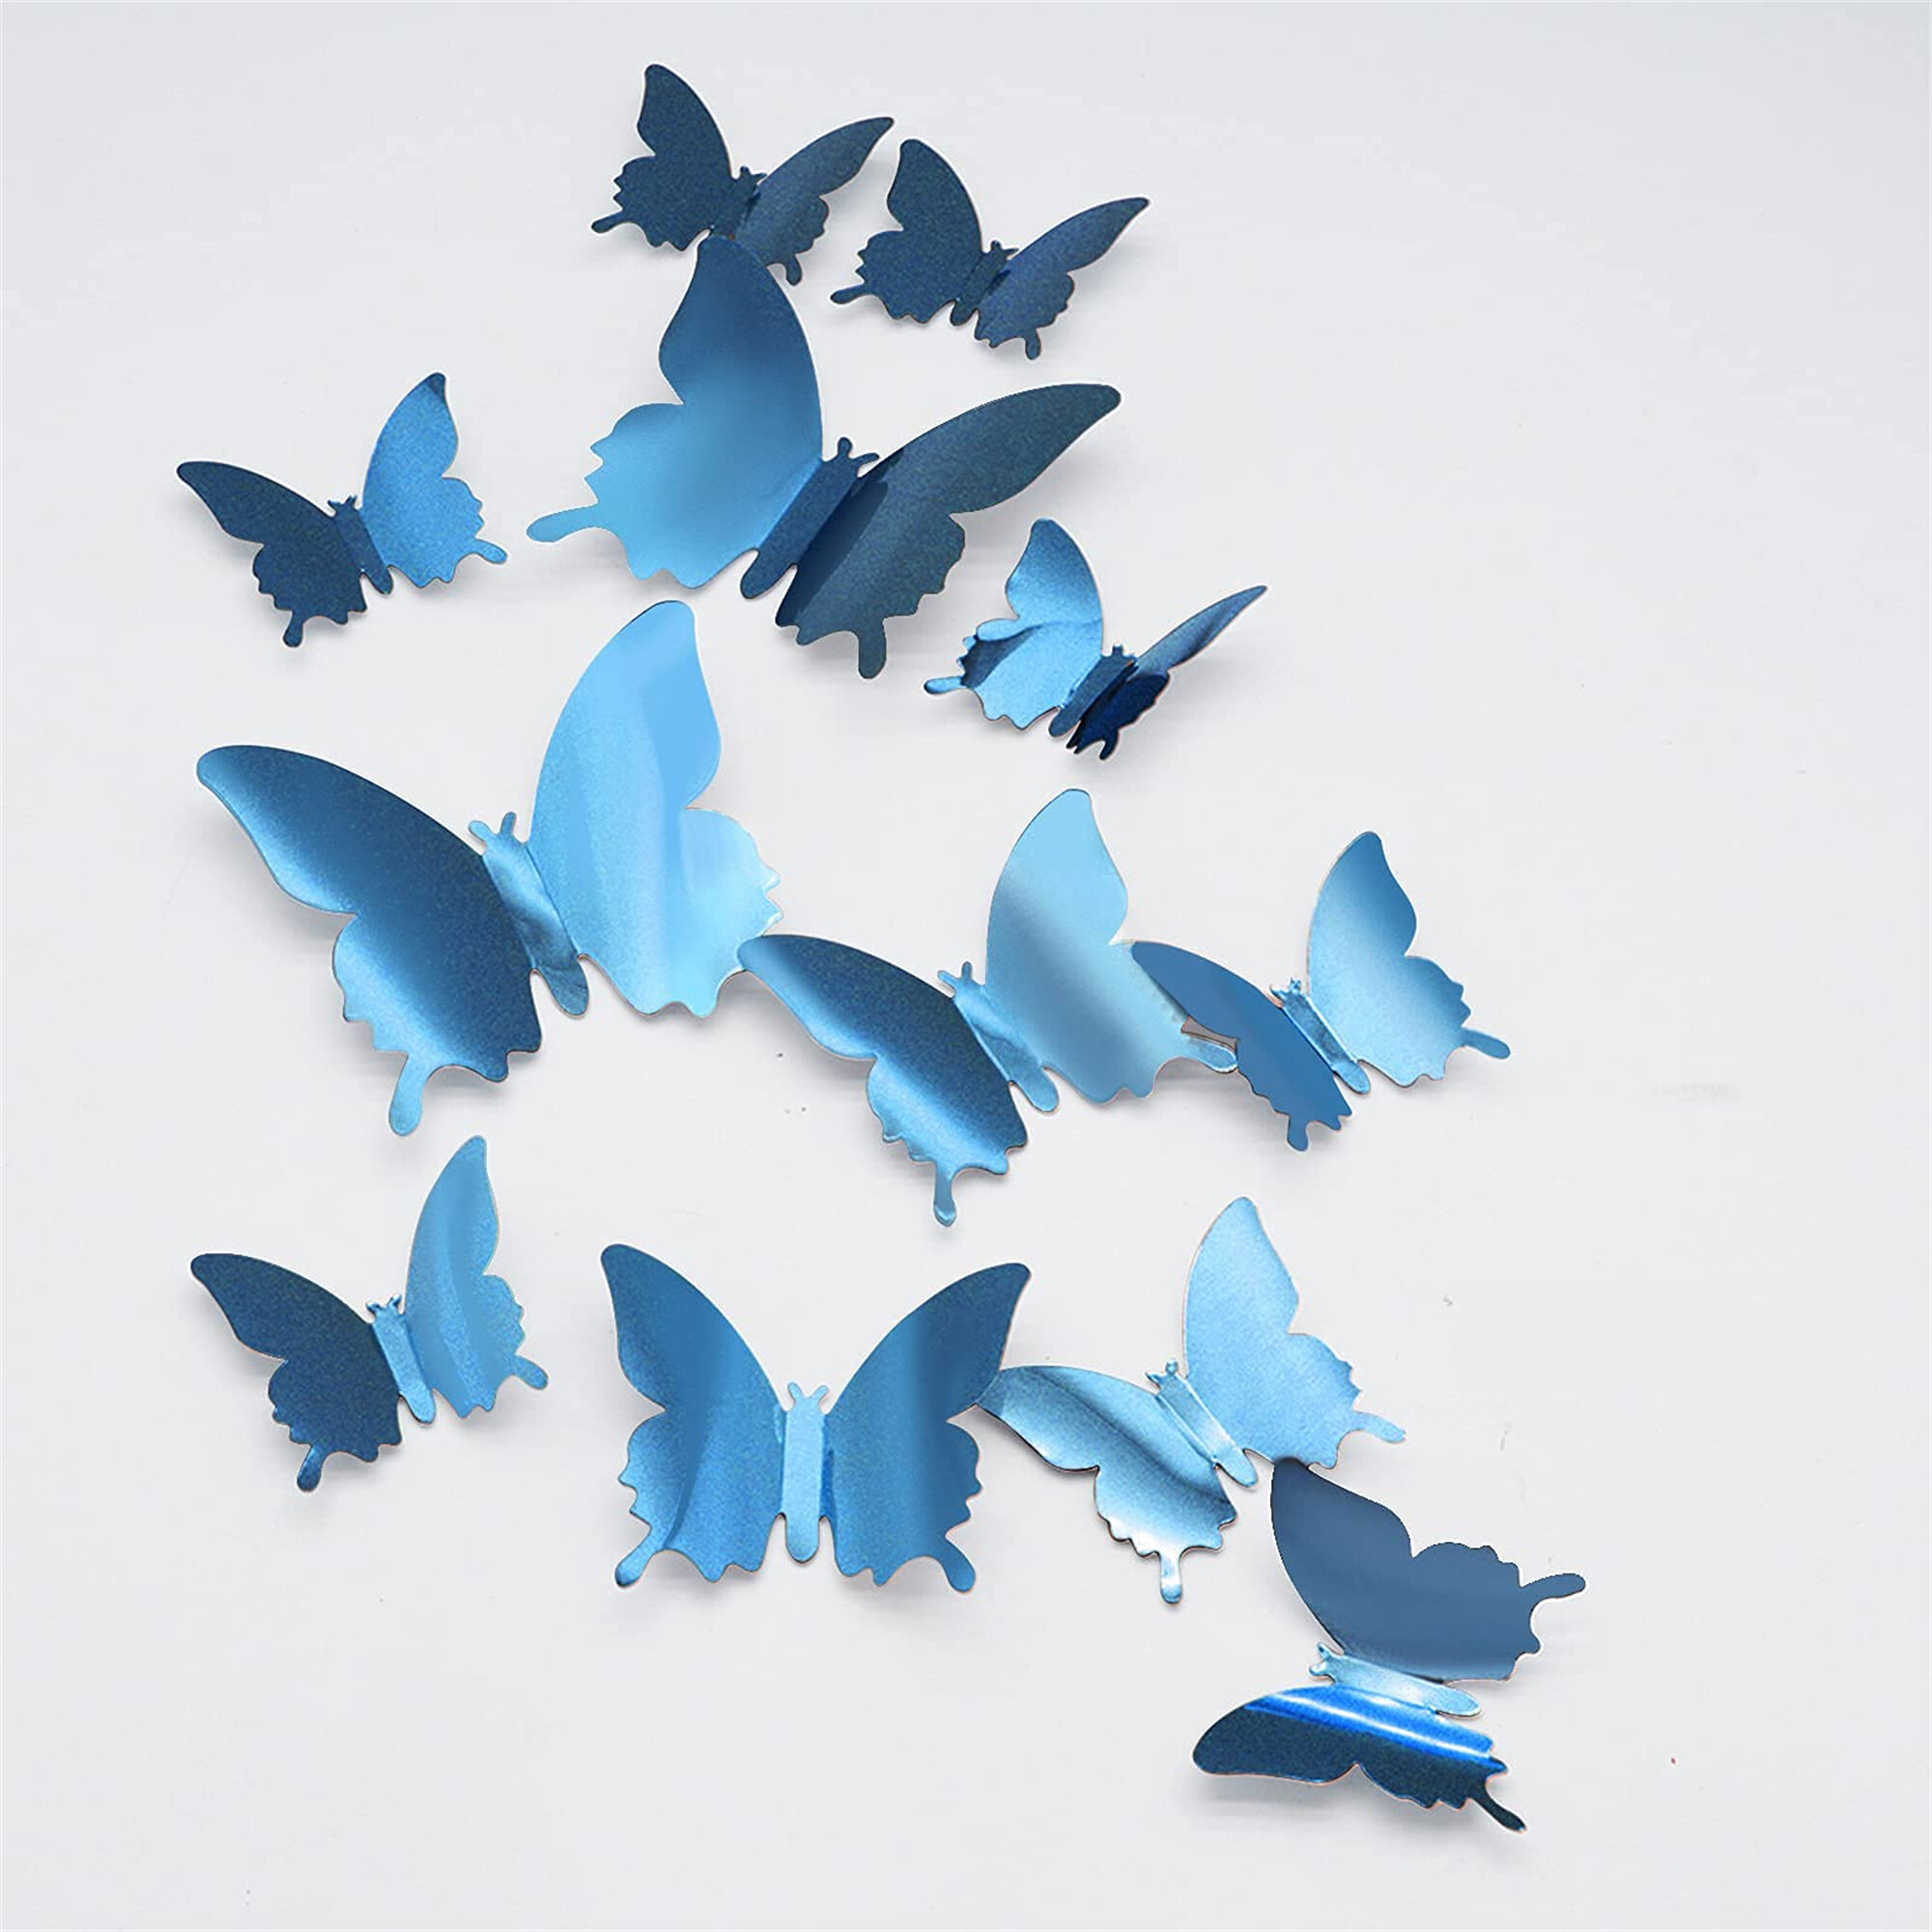 12/24pcs Butterfly Design Wall Stickers 3D Decal Home Room Decorations Decor